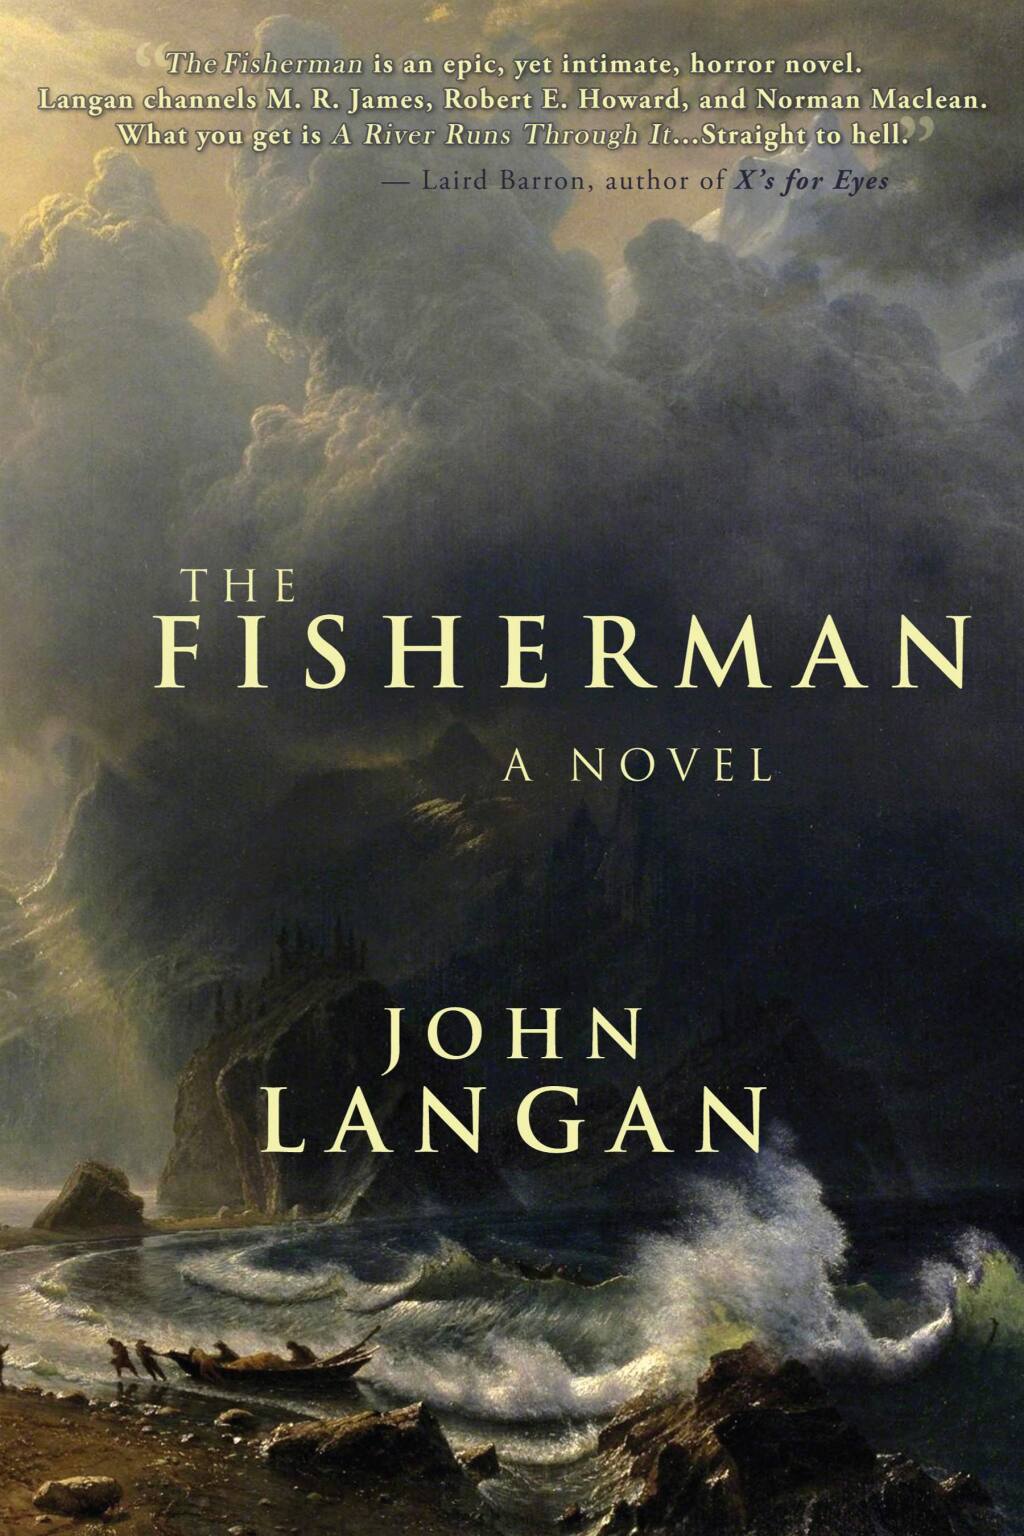 Petaluma's Word Horde Books' 2016 'The Fisherman' was just named the 15th best horror novel of the last decade.